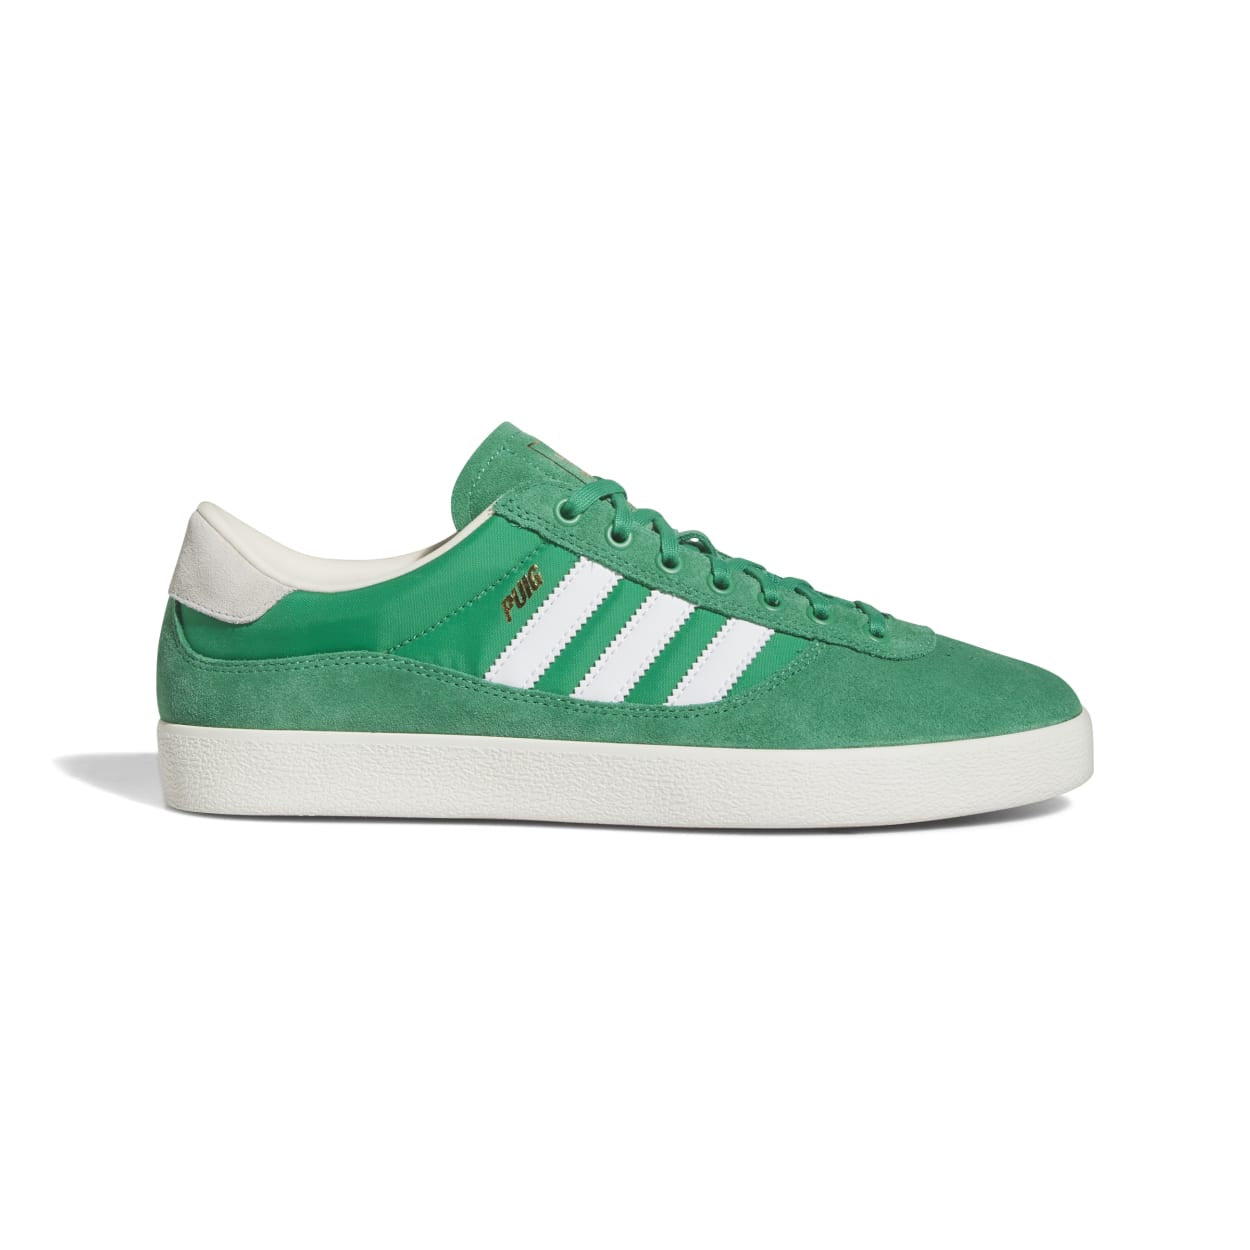 ADIDAS - PUIG INDOOR SHOES - COURT GREEN / WHITE